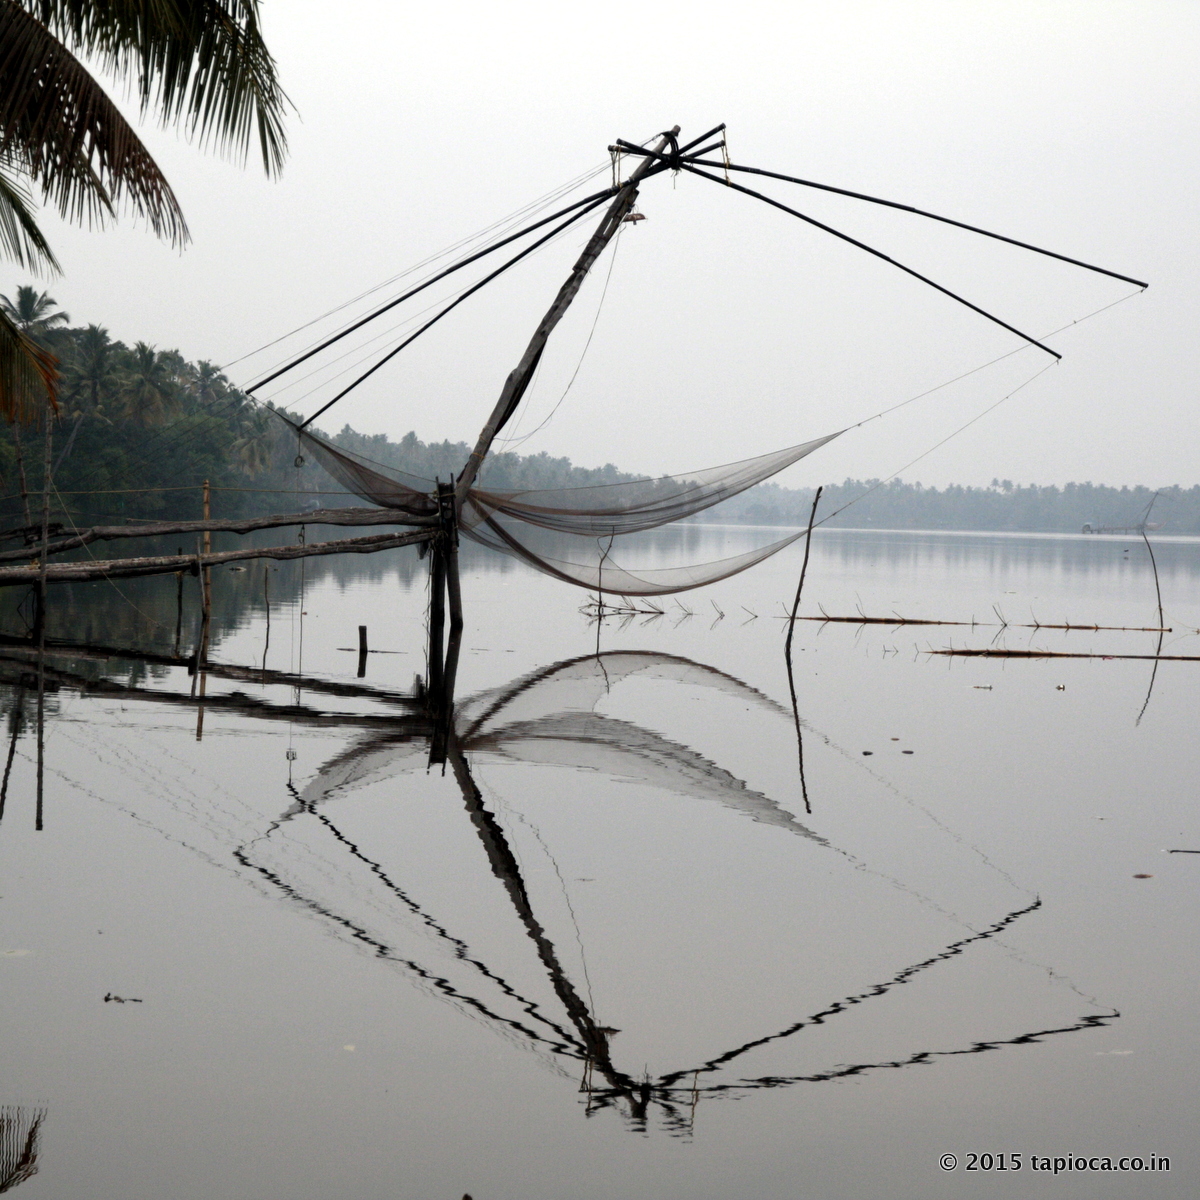 There are quite a few locations in Cherai where you can see the Chinese Fishing net in action.